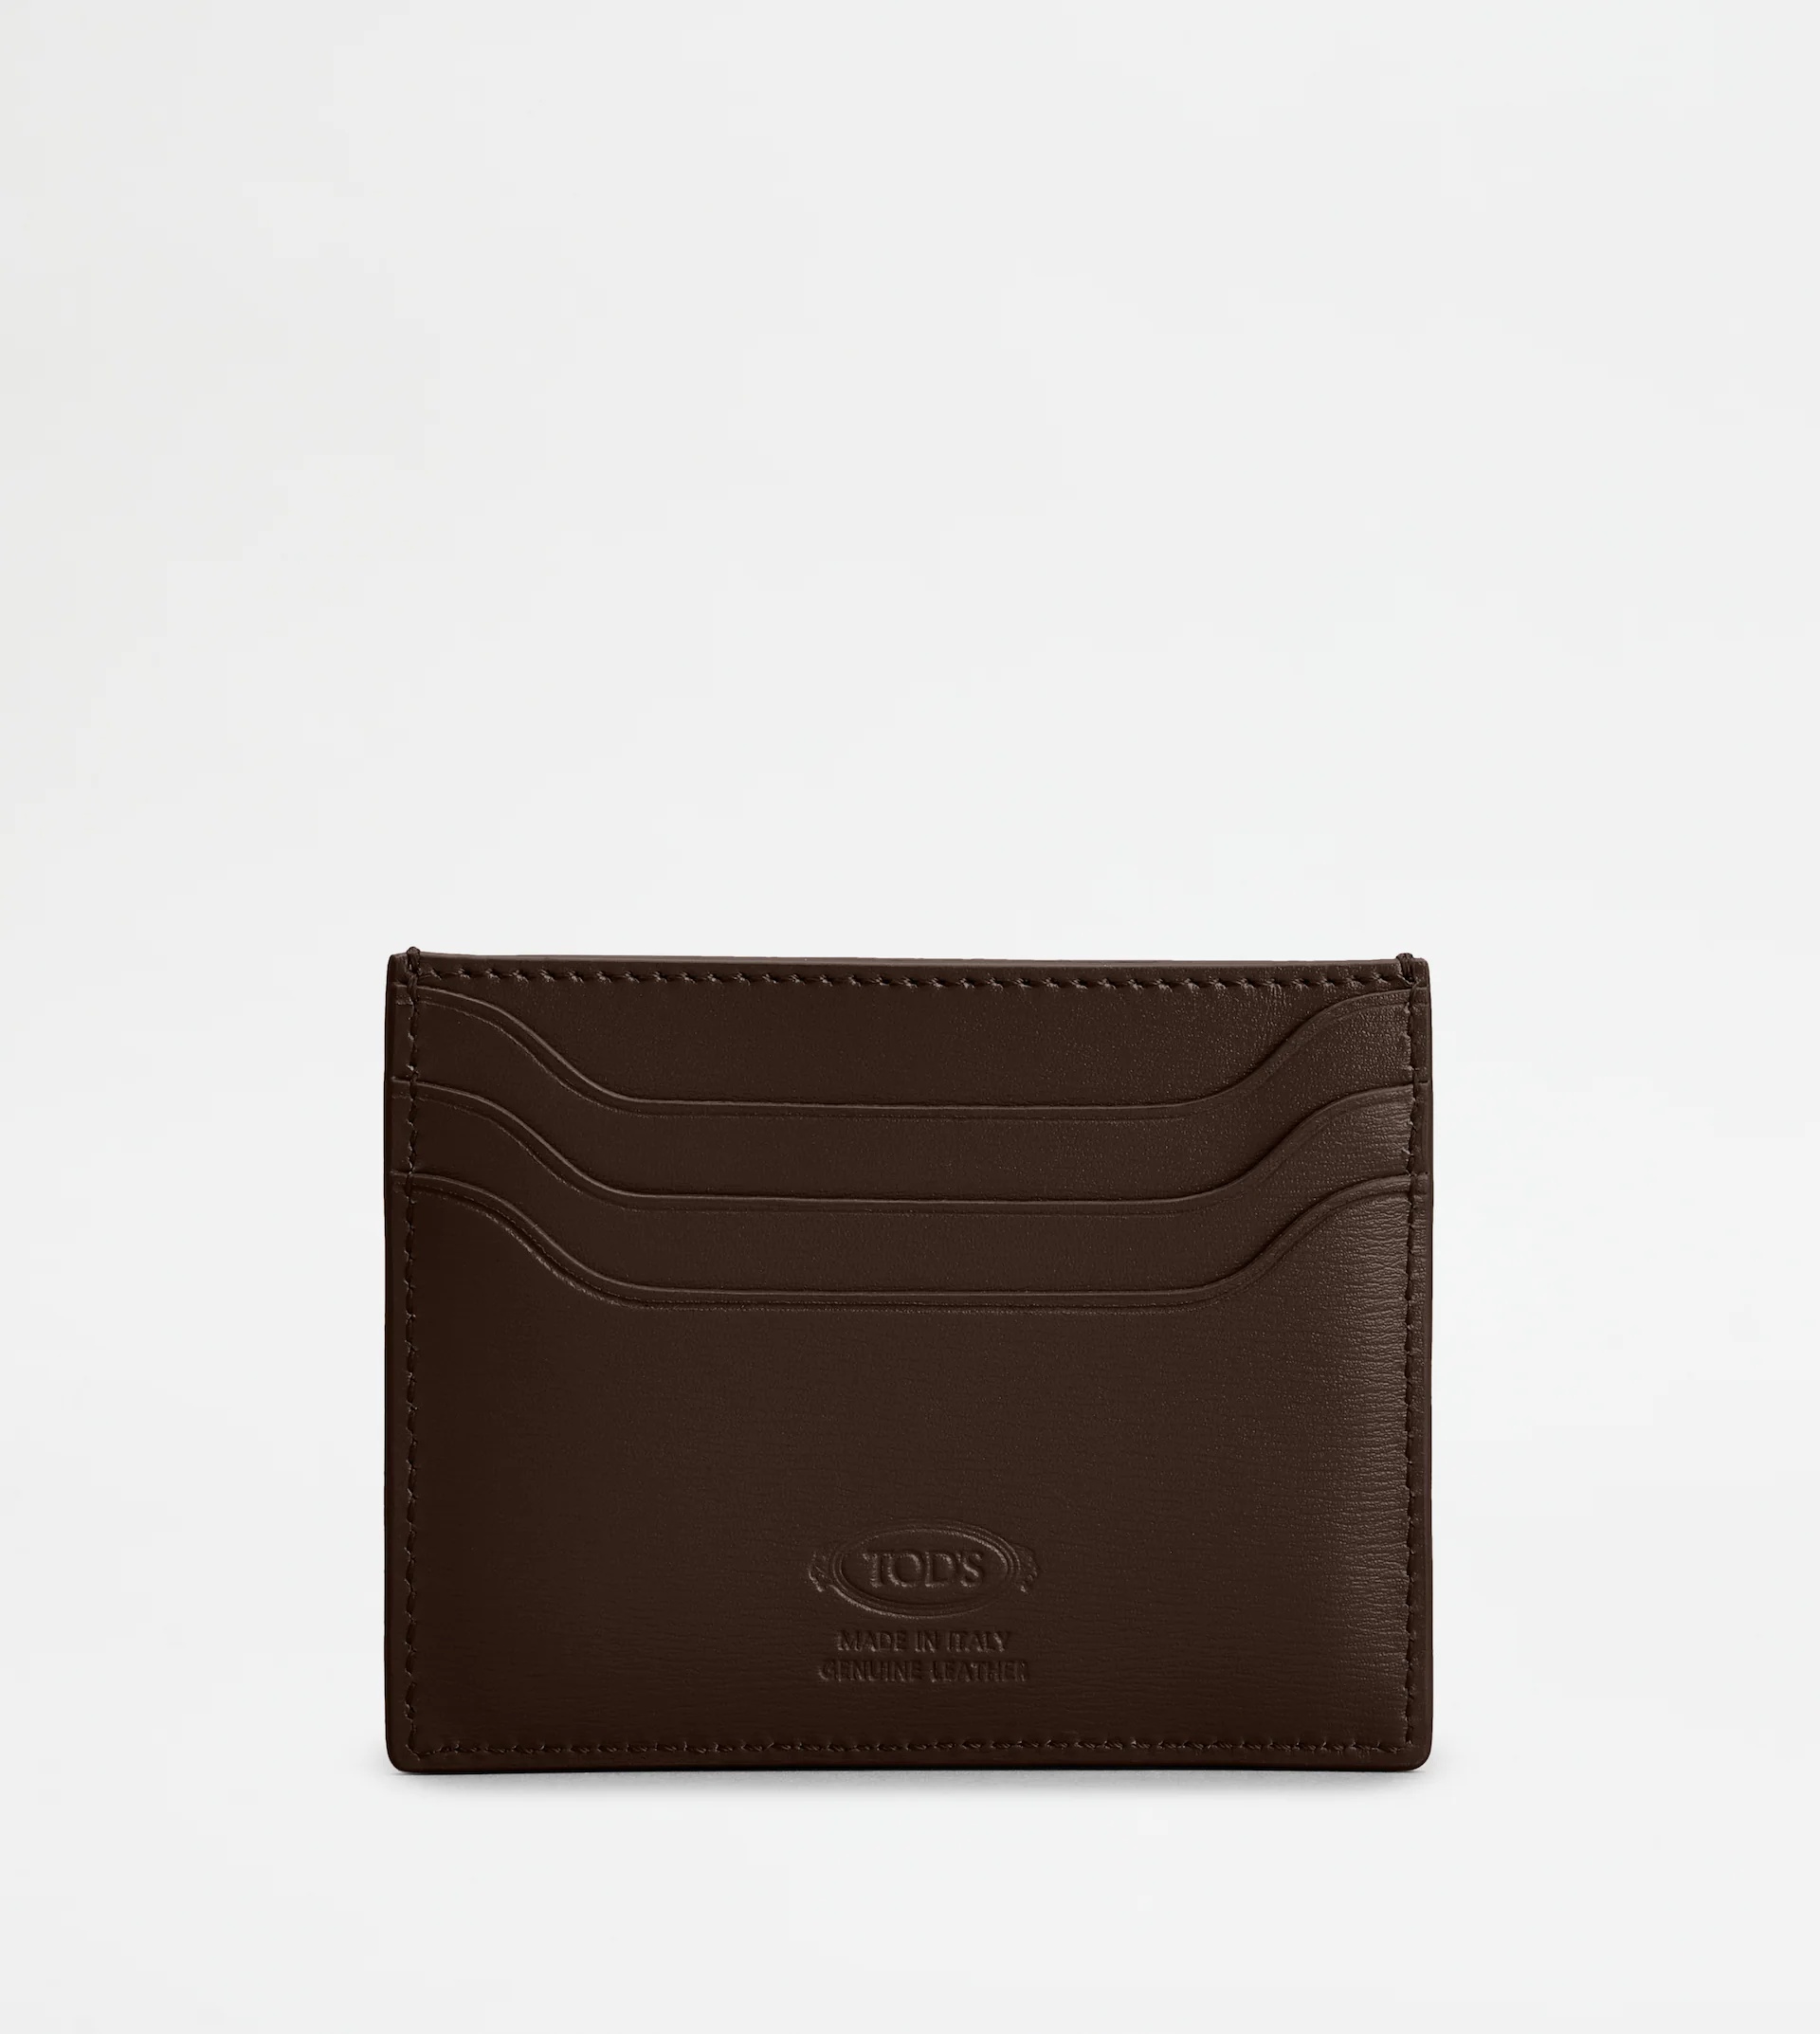 TOD'S CARD HOLDER IN LEATHER - BROWN - 2